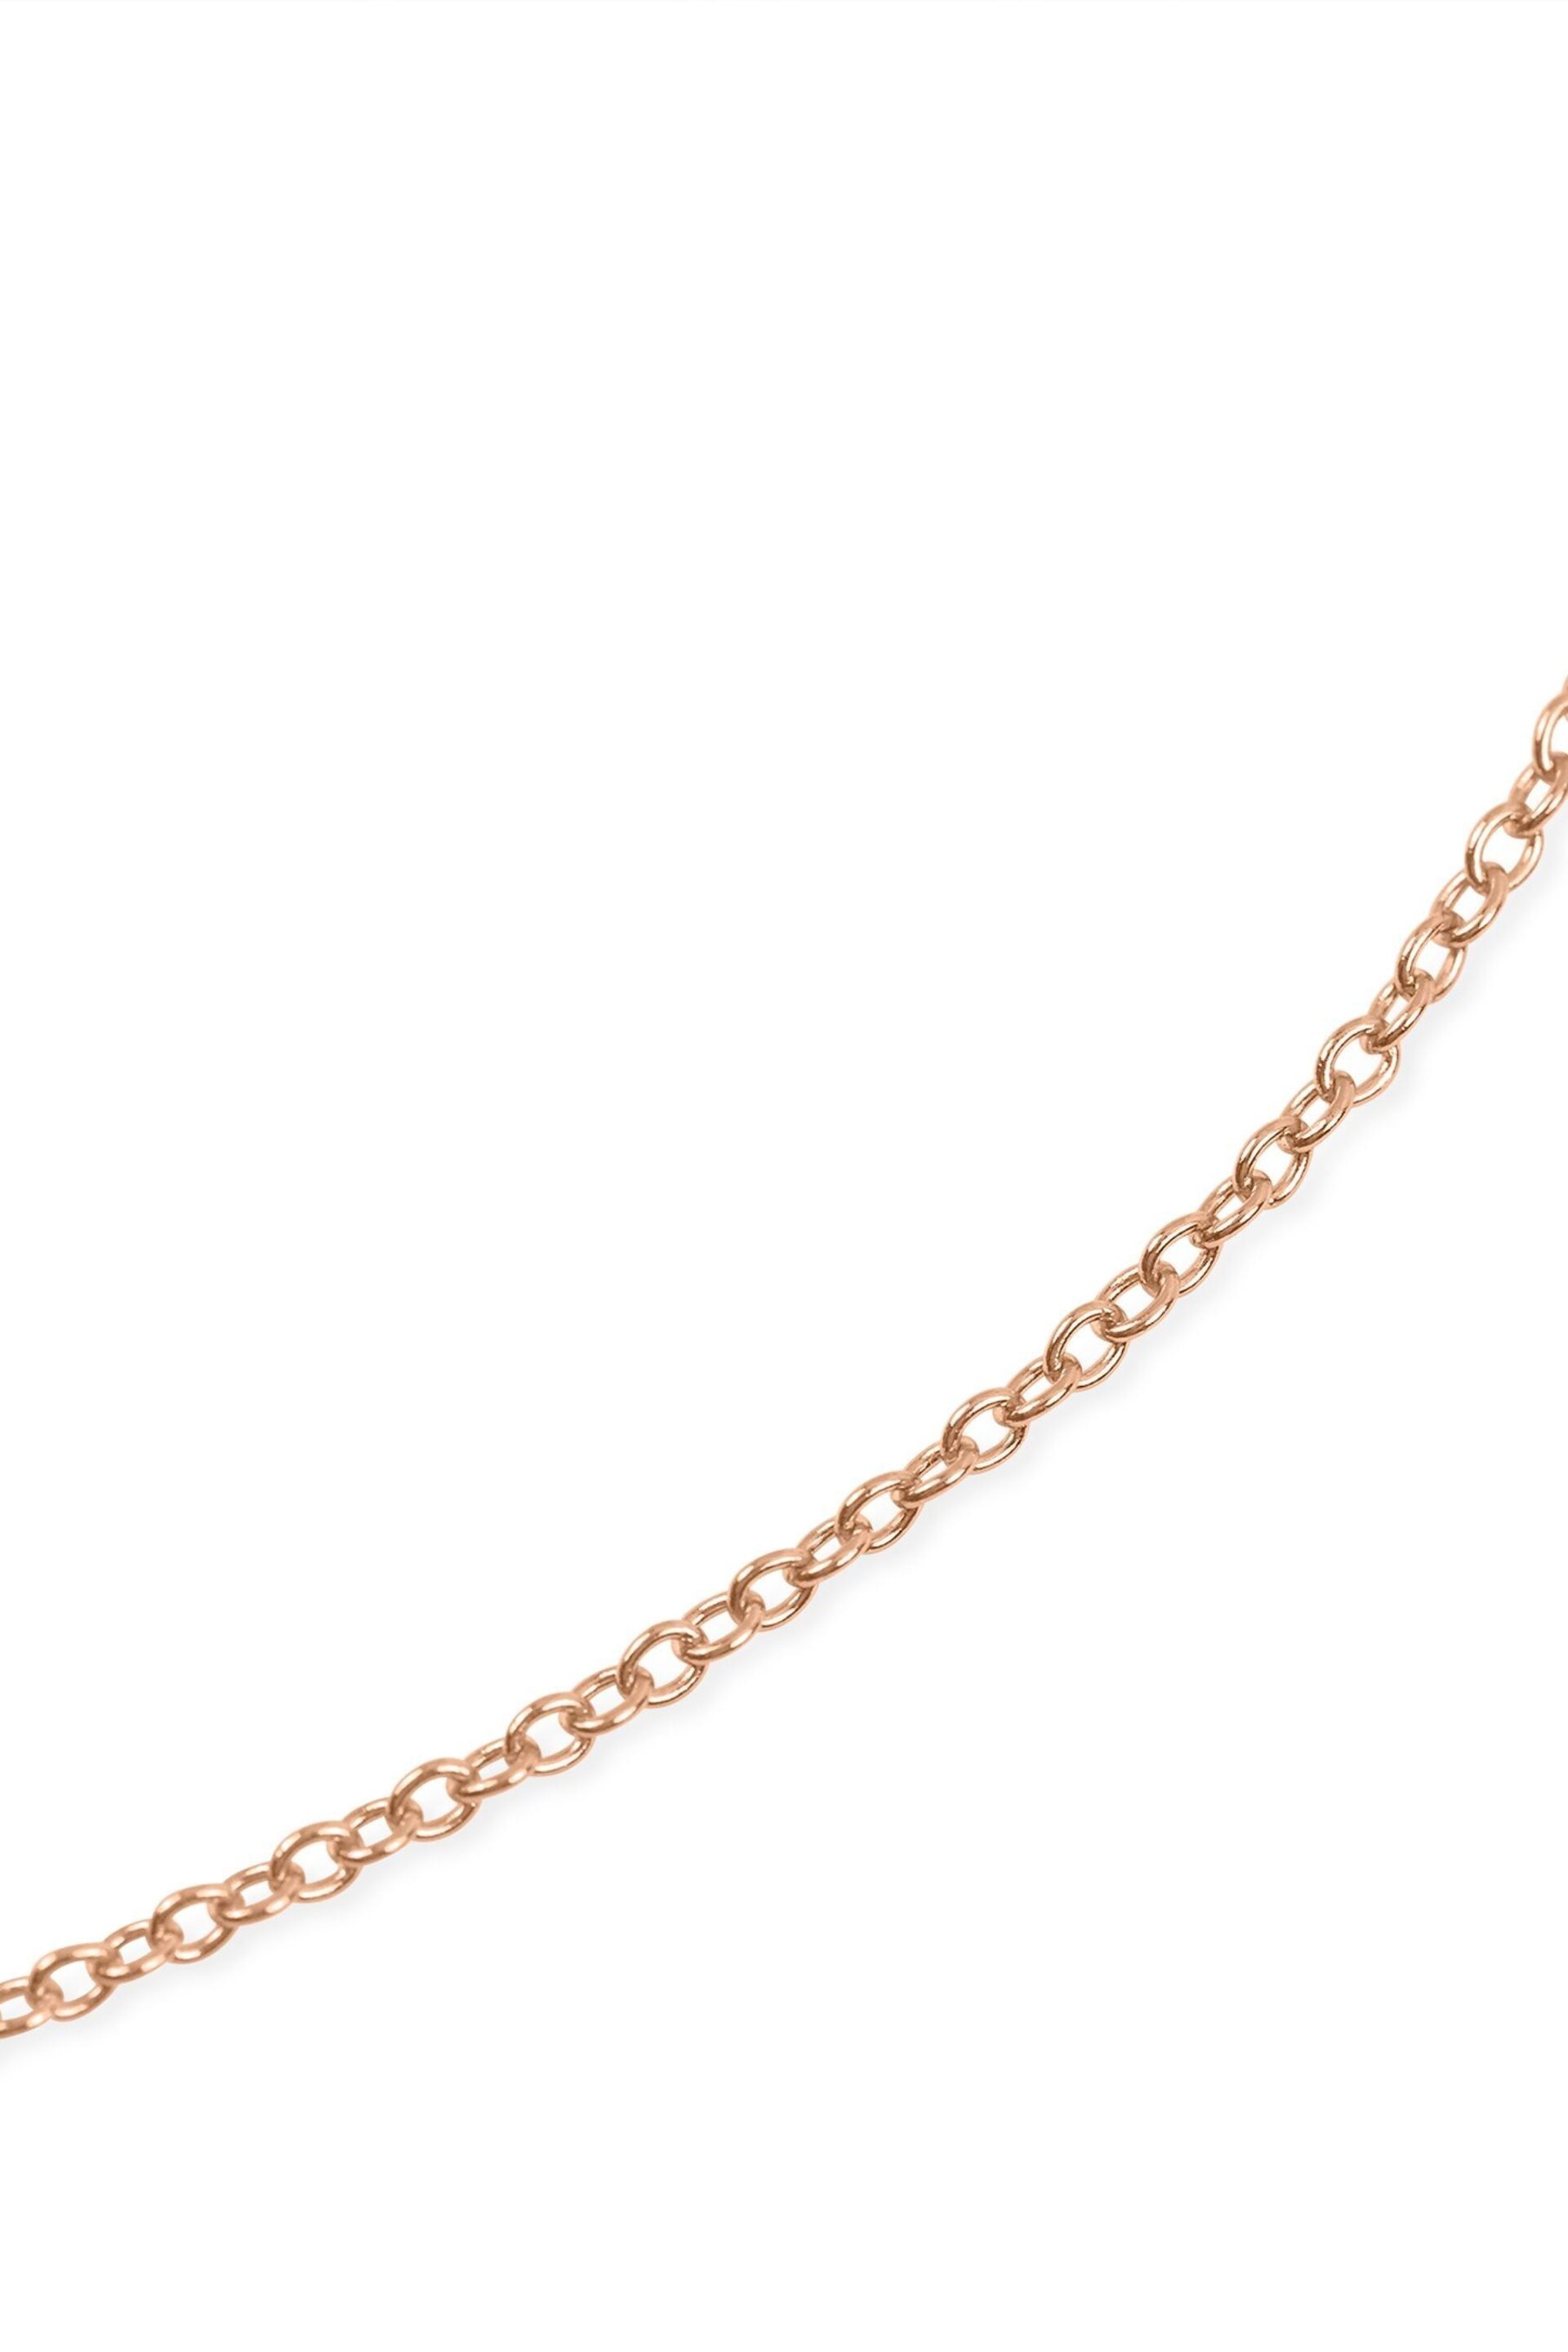 Radley Ladies Love 18ct Rose Gold Tone Sterling Silver Clear Stone Heart Necklace - Image 4 of 6